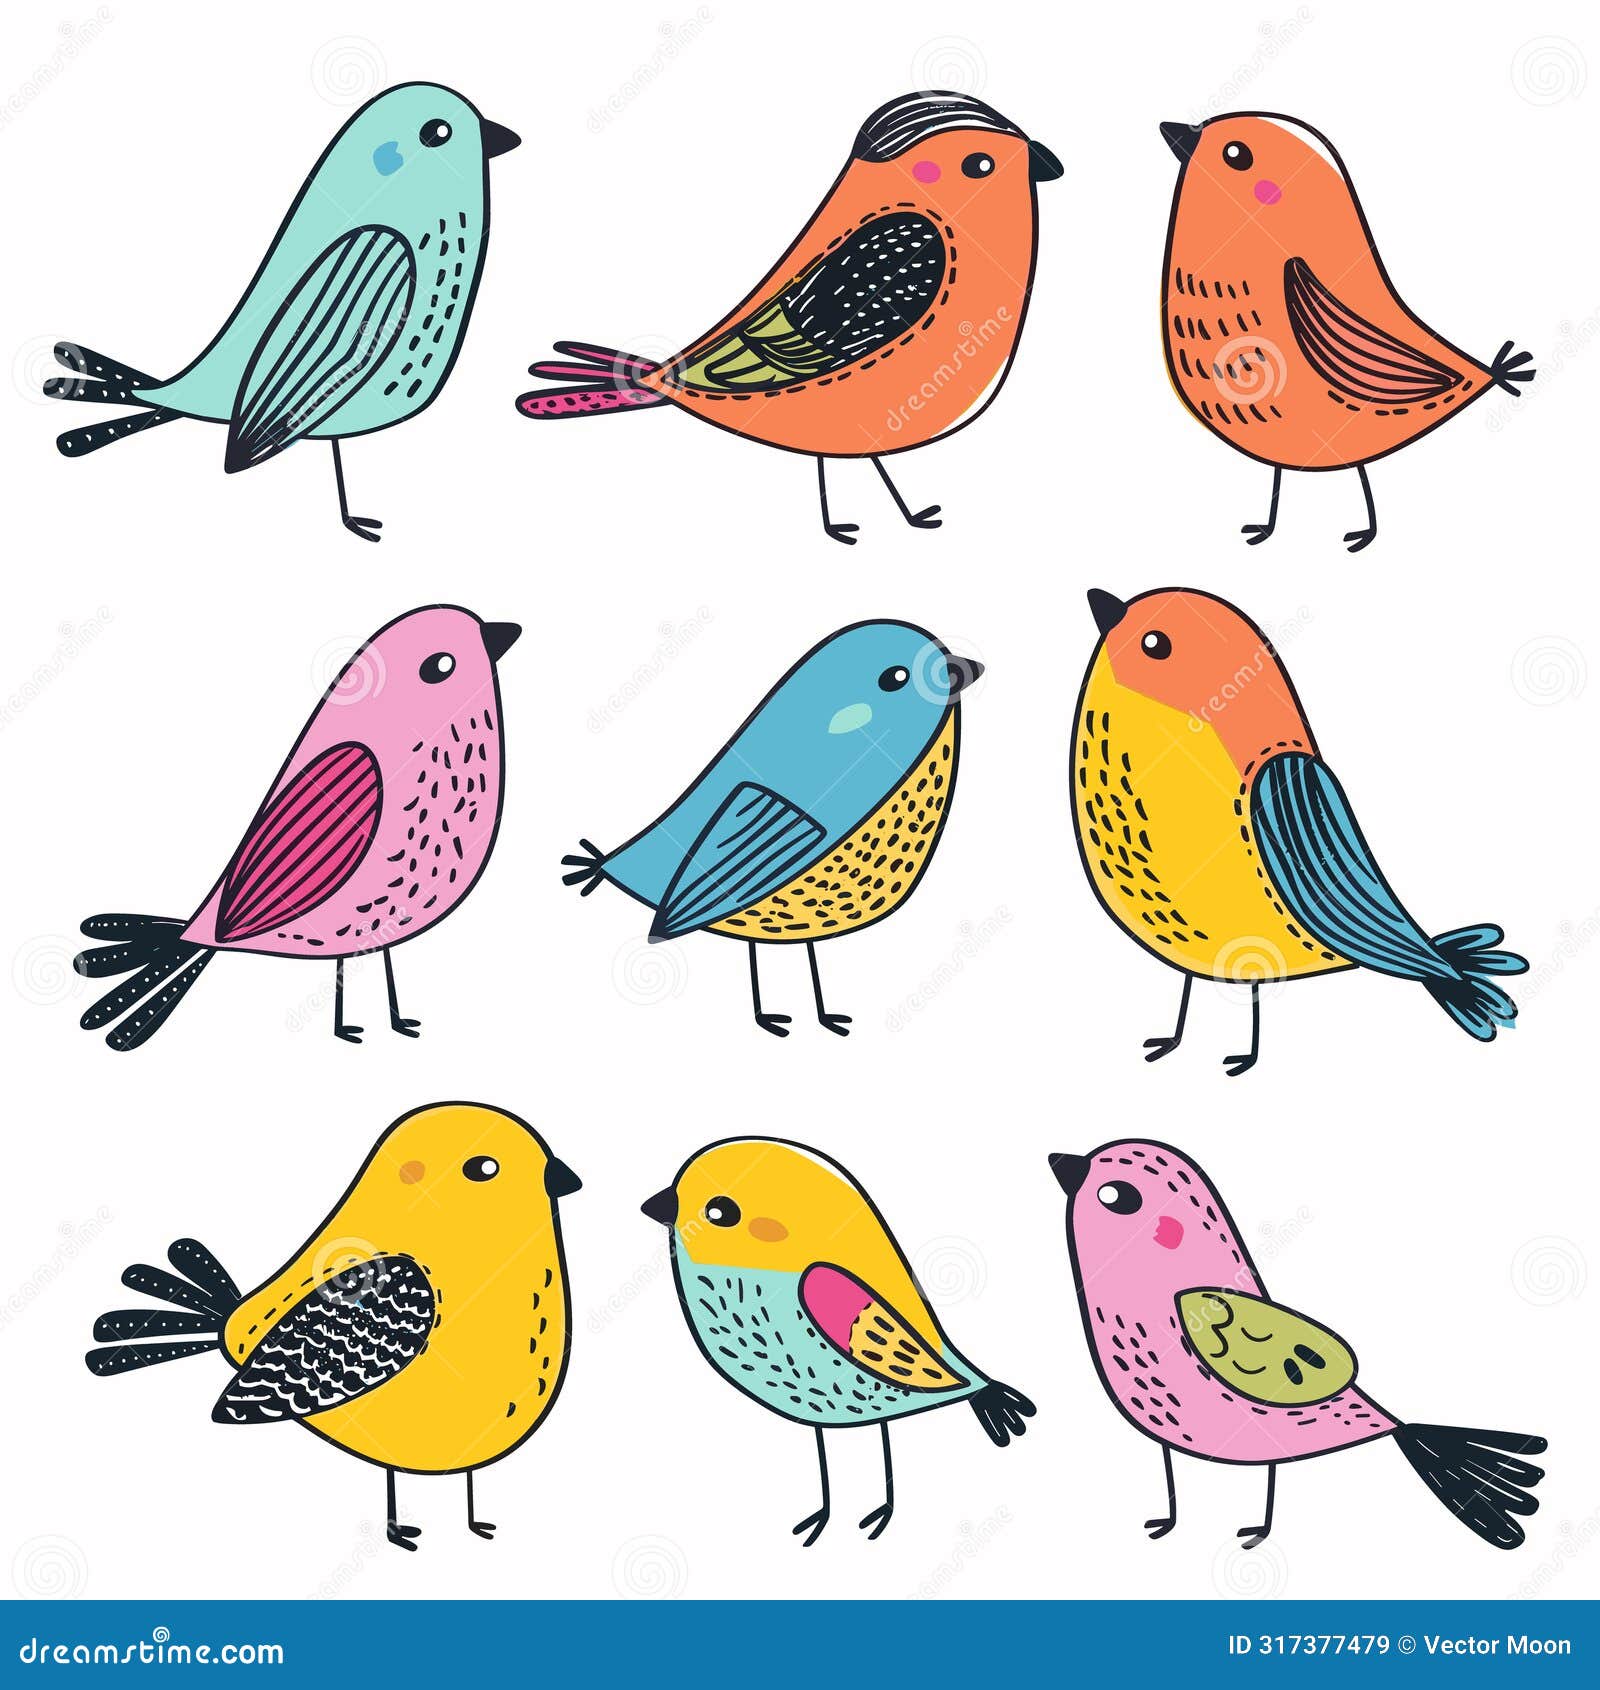 collection colorful birds standing various poses. whimsical illustrated songbirds diverse colors